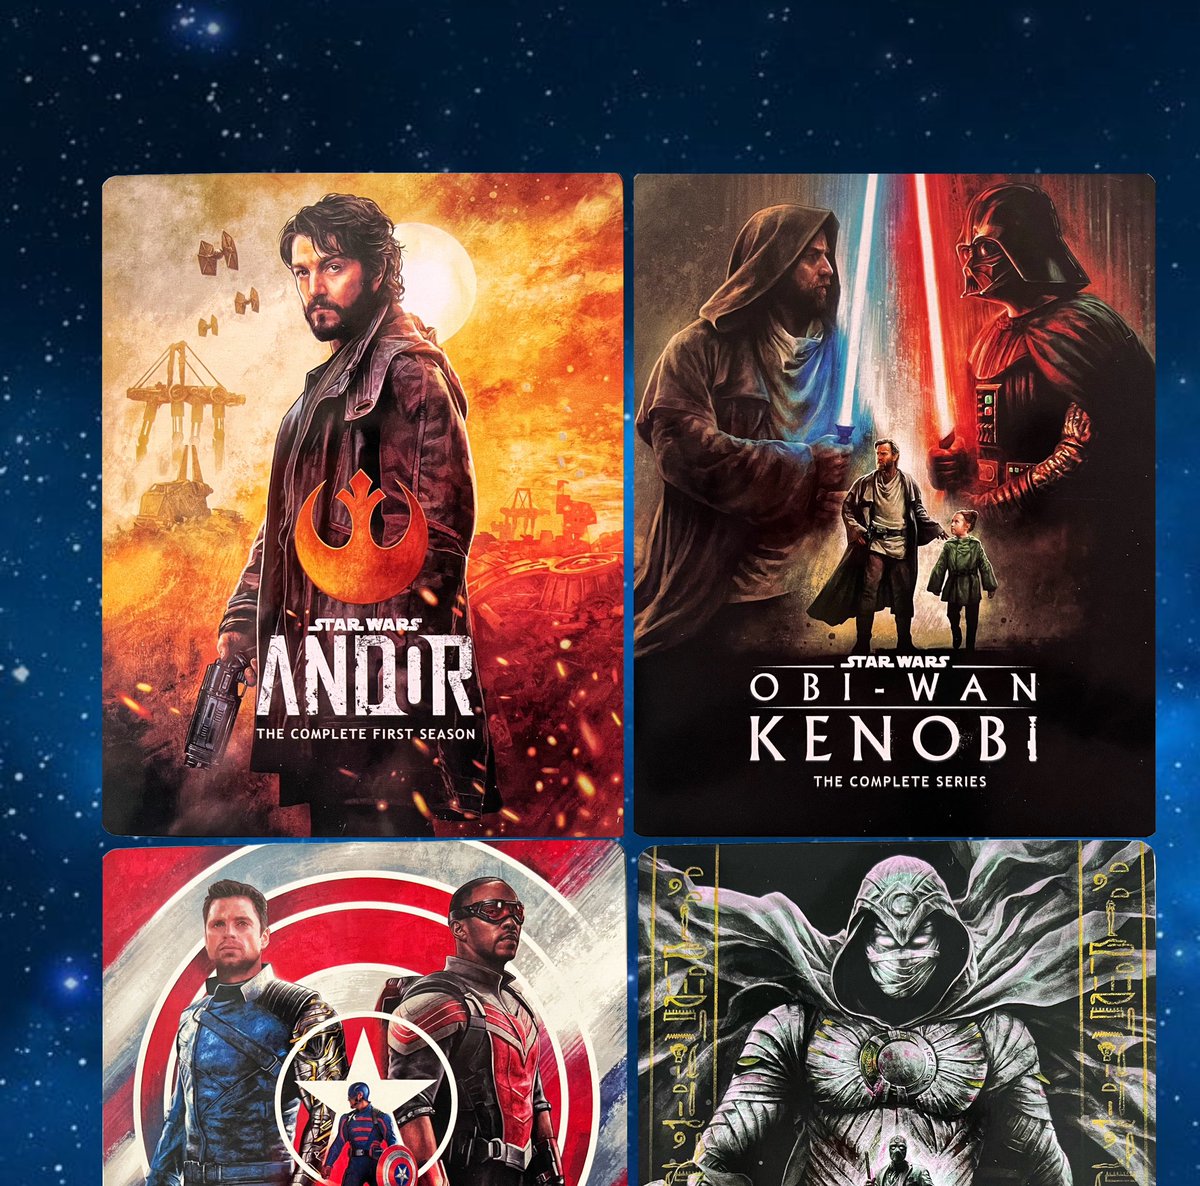 Disney+Star Wars+Marvel
4K+Steelbooks >> Doesn't get any better than that.
😍❤️👍🏻4/30 #Andor #ObiWan #TheFalconAndTheWinterSoldier #MoonKnight #4K #steelbook #moviecollection #haul #newreleases